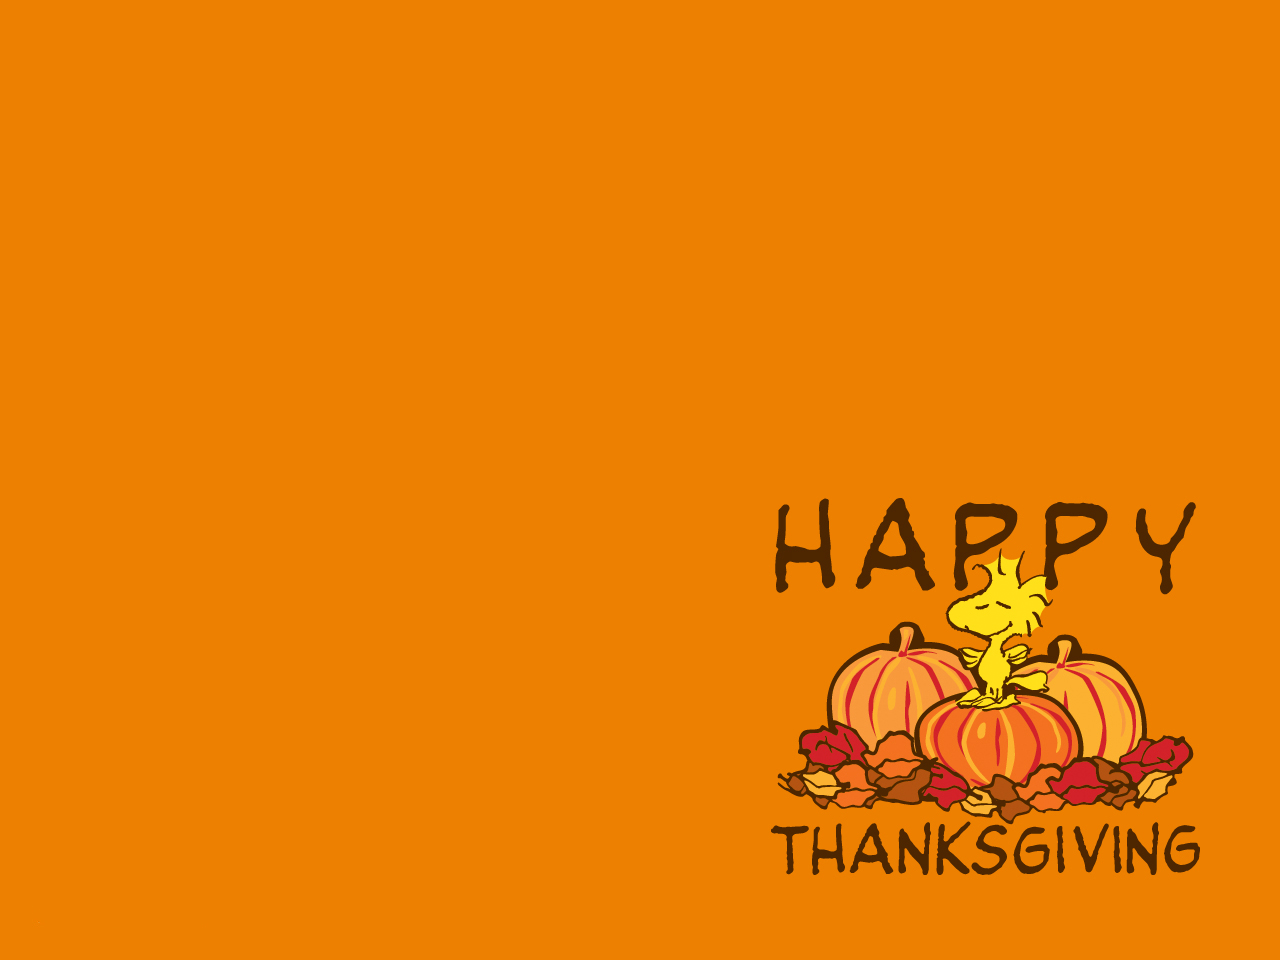 Thanksgiving Day 2012 Free HD Thanksgiving Wallpapers for iPad and